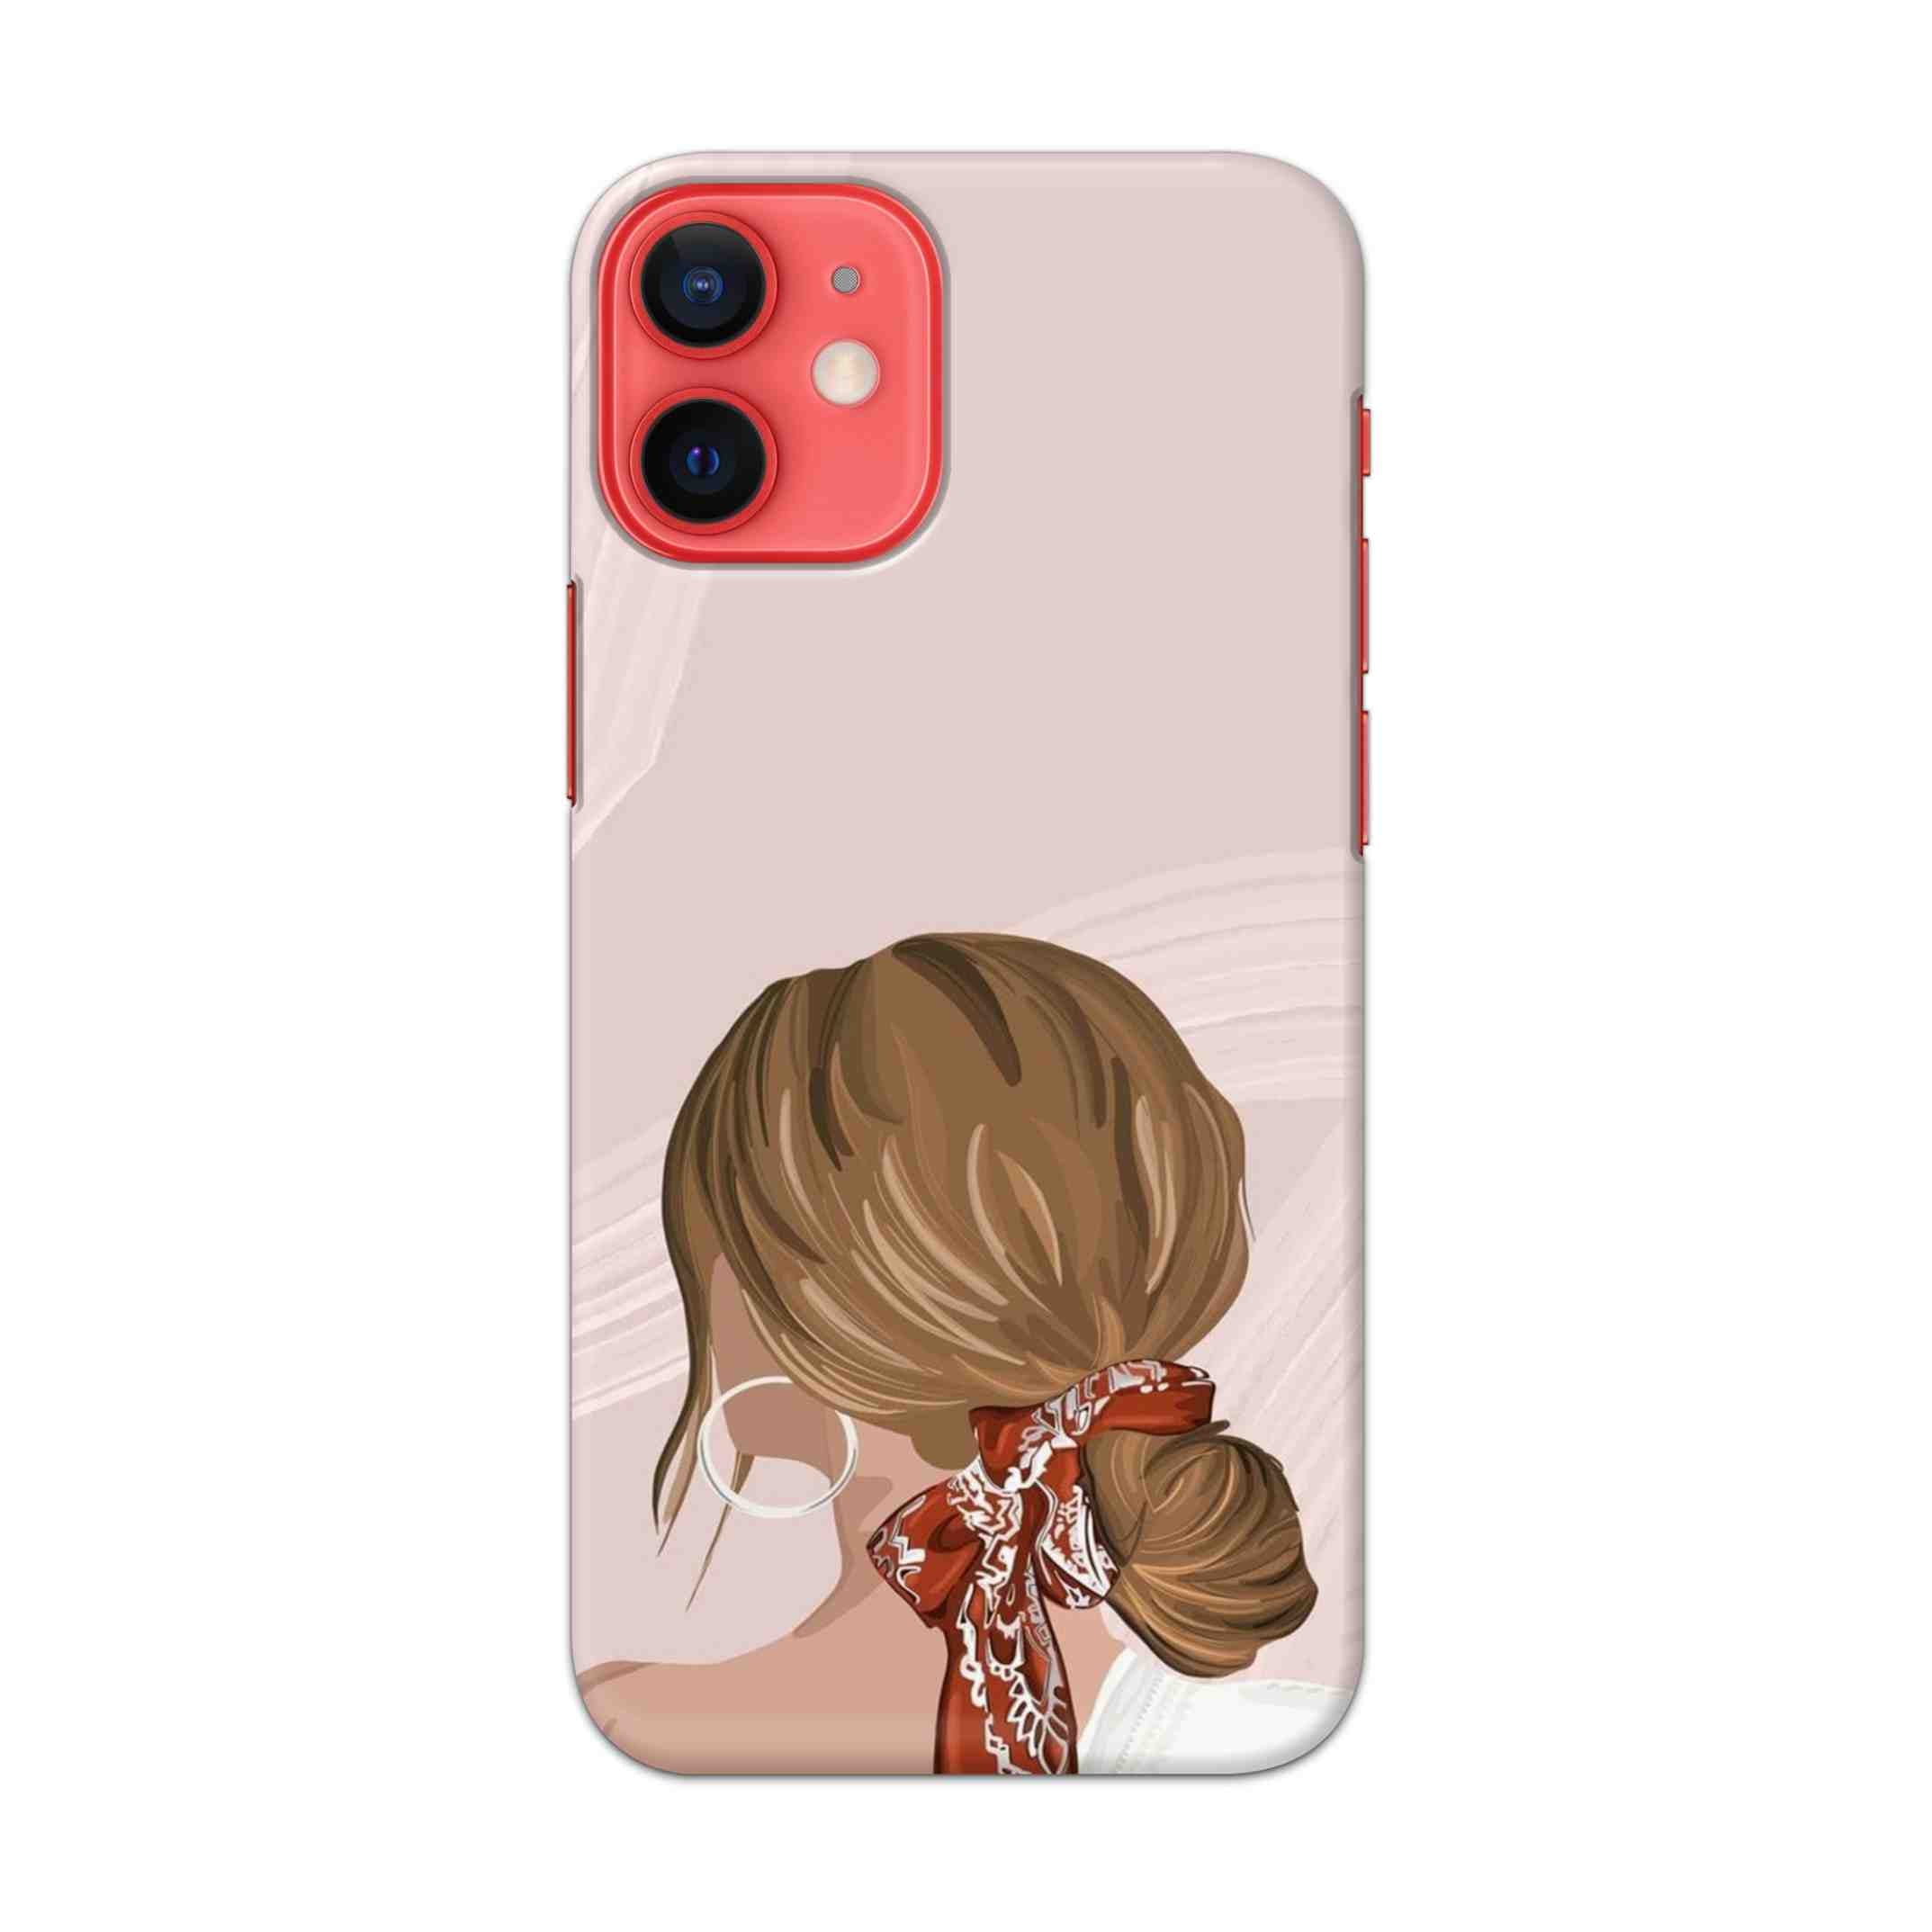 Buy Girl With Red Scaff Hard Back Mobile Phone Case Cover For Apple iPhone 12 Online